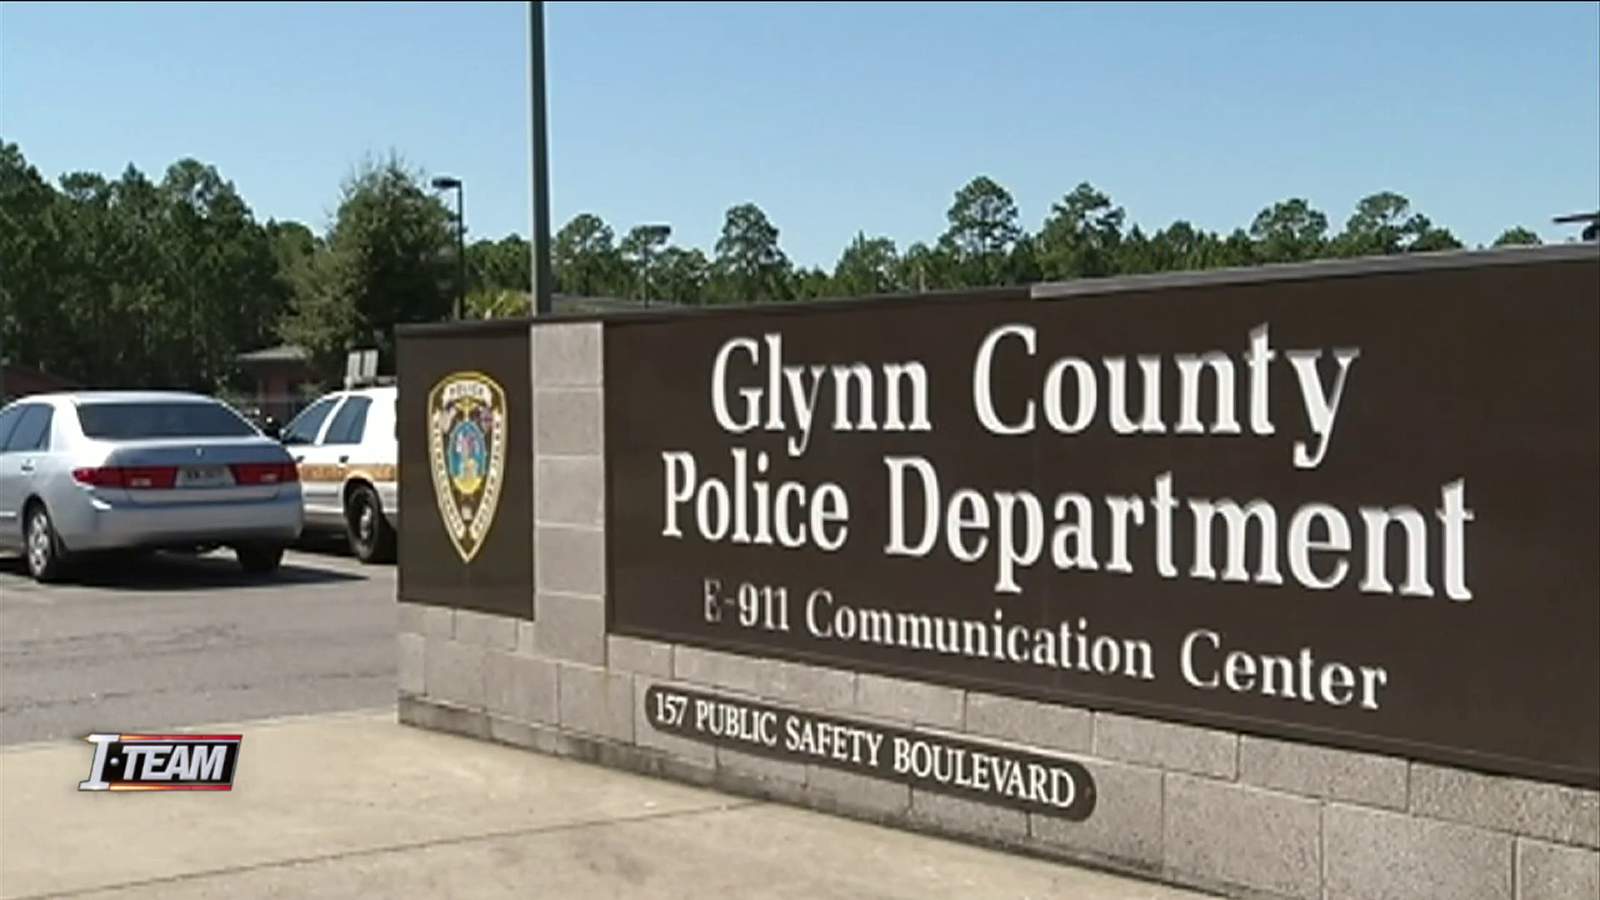 I-TEAM: Controversial Glynn County cases back under the microscope